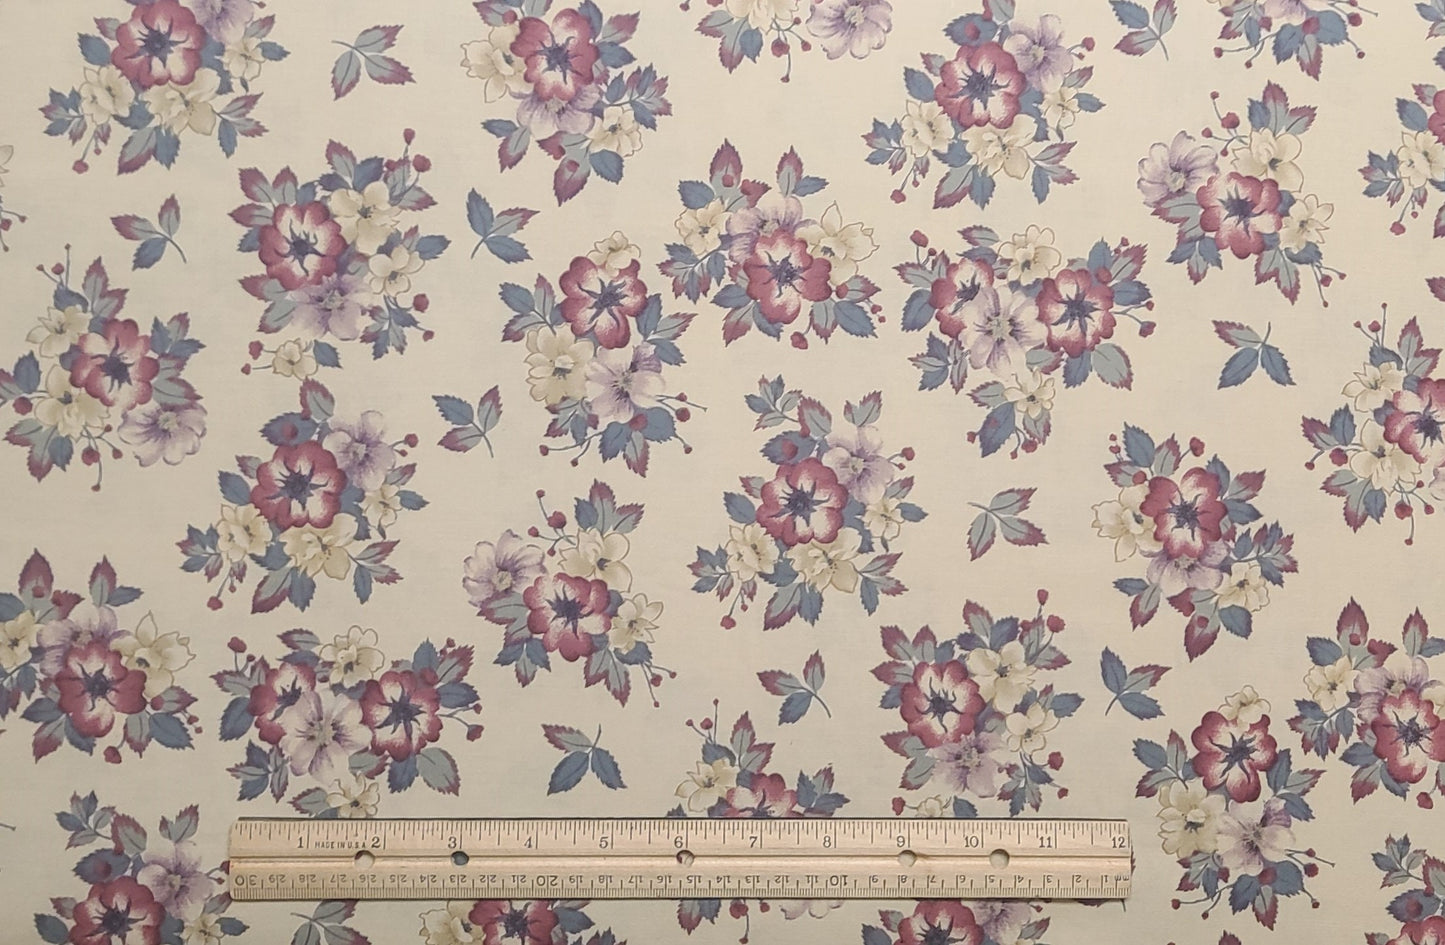 Forget Me Not by Hoffman California Fabrics - Pale Tan Fabric / Maroon, Green and Cream Vintage Floral Pattern